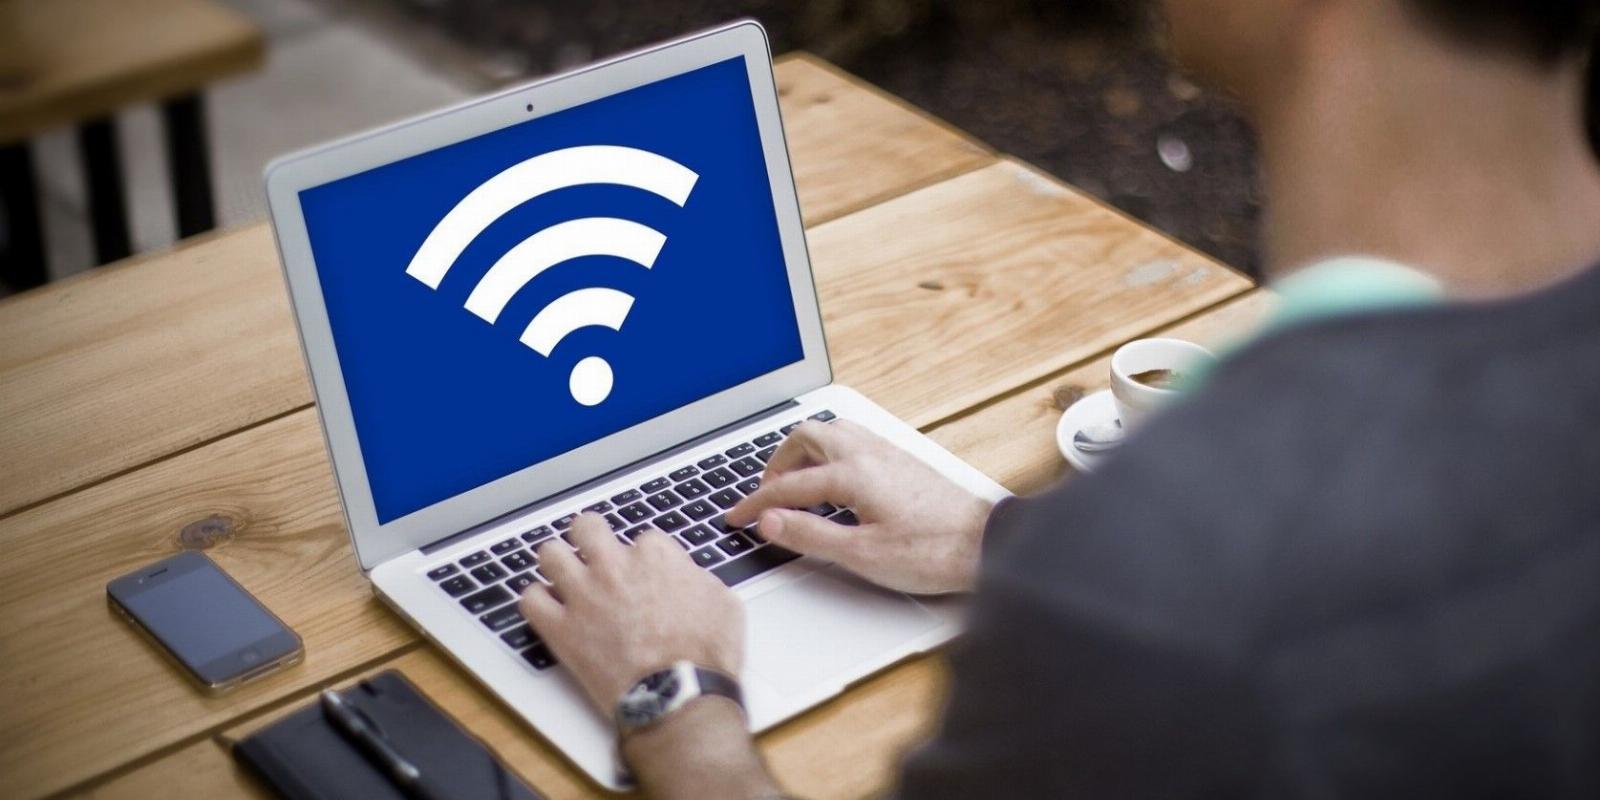 How to Enable or Disable Metered Connection for a Wi-Fi Network in Windows 11